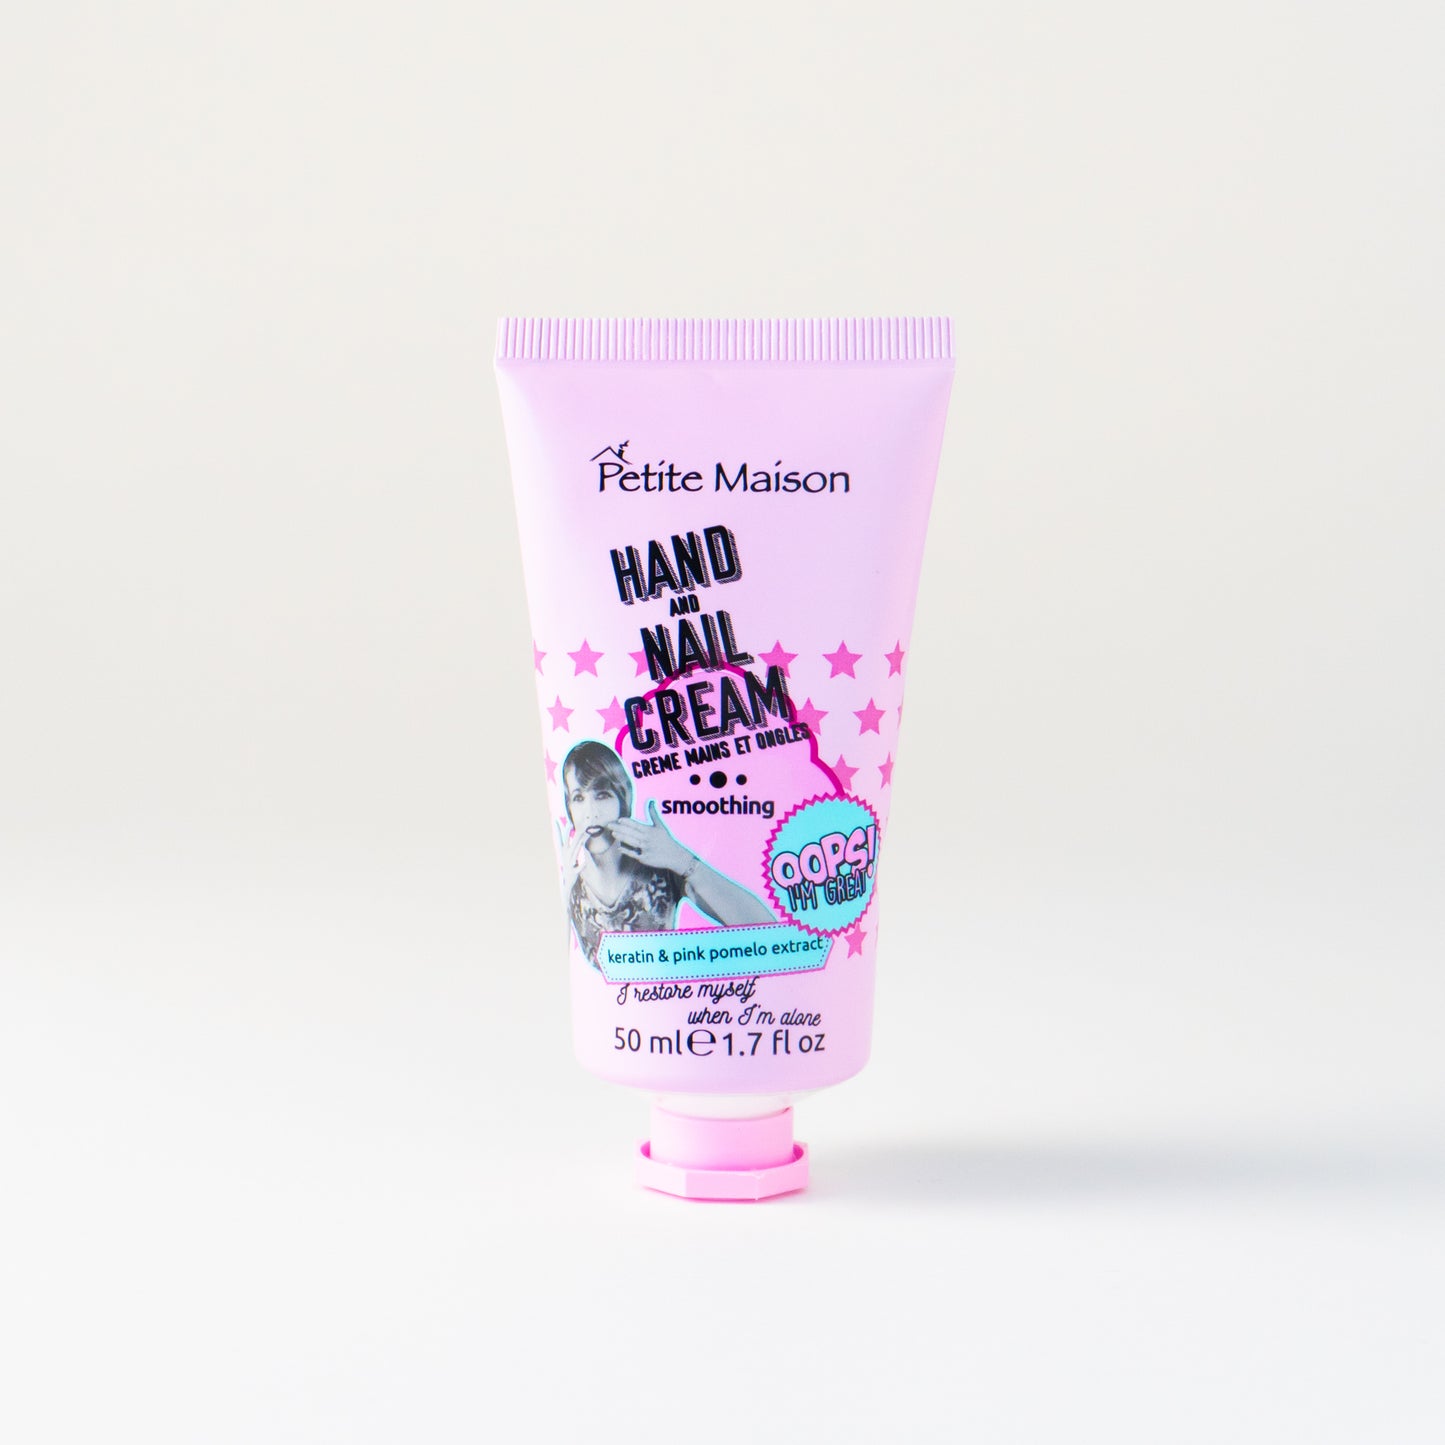 Petite Maison Hand and Nail Cream - Smoothing